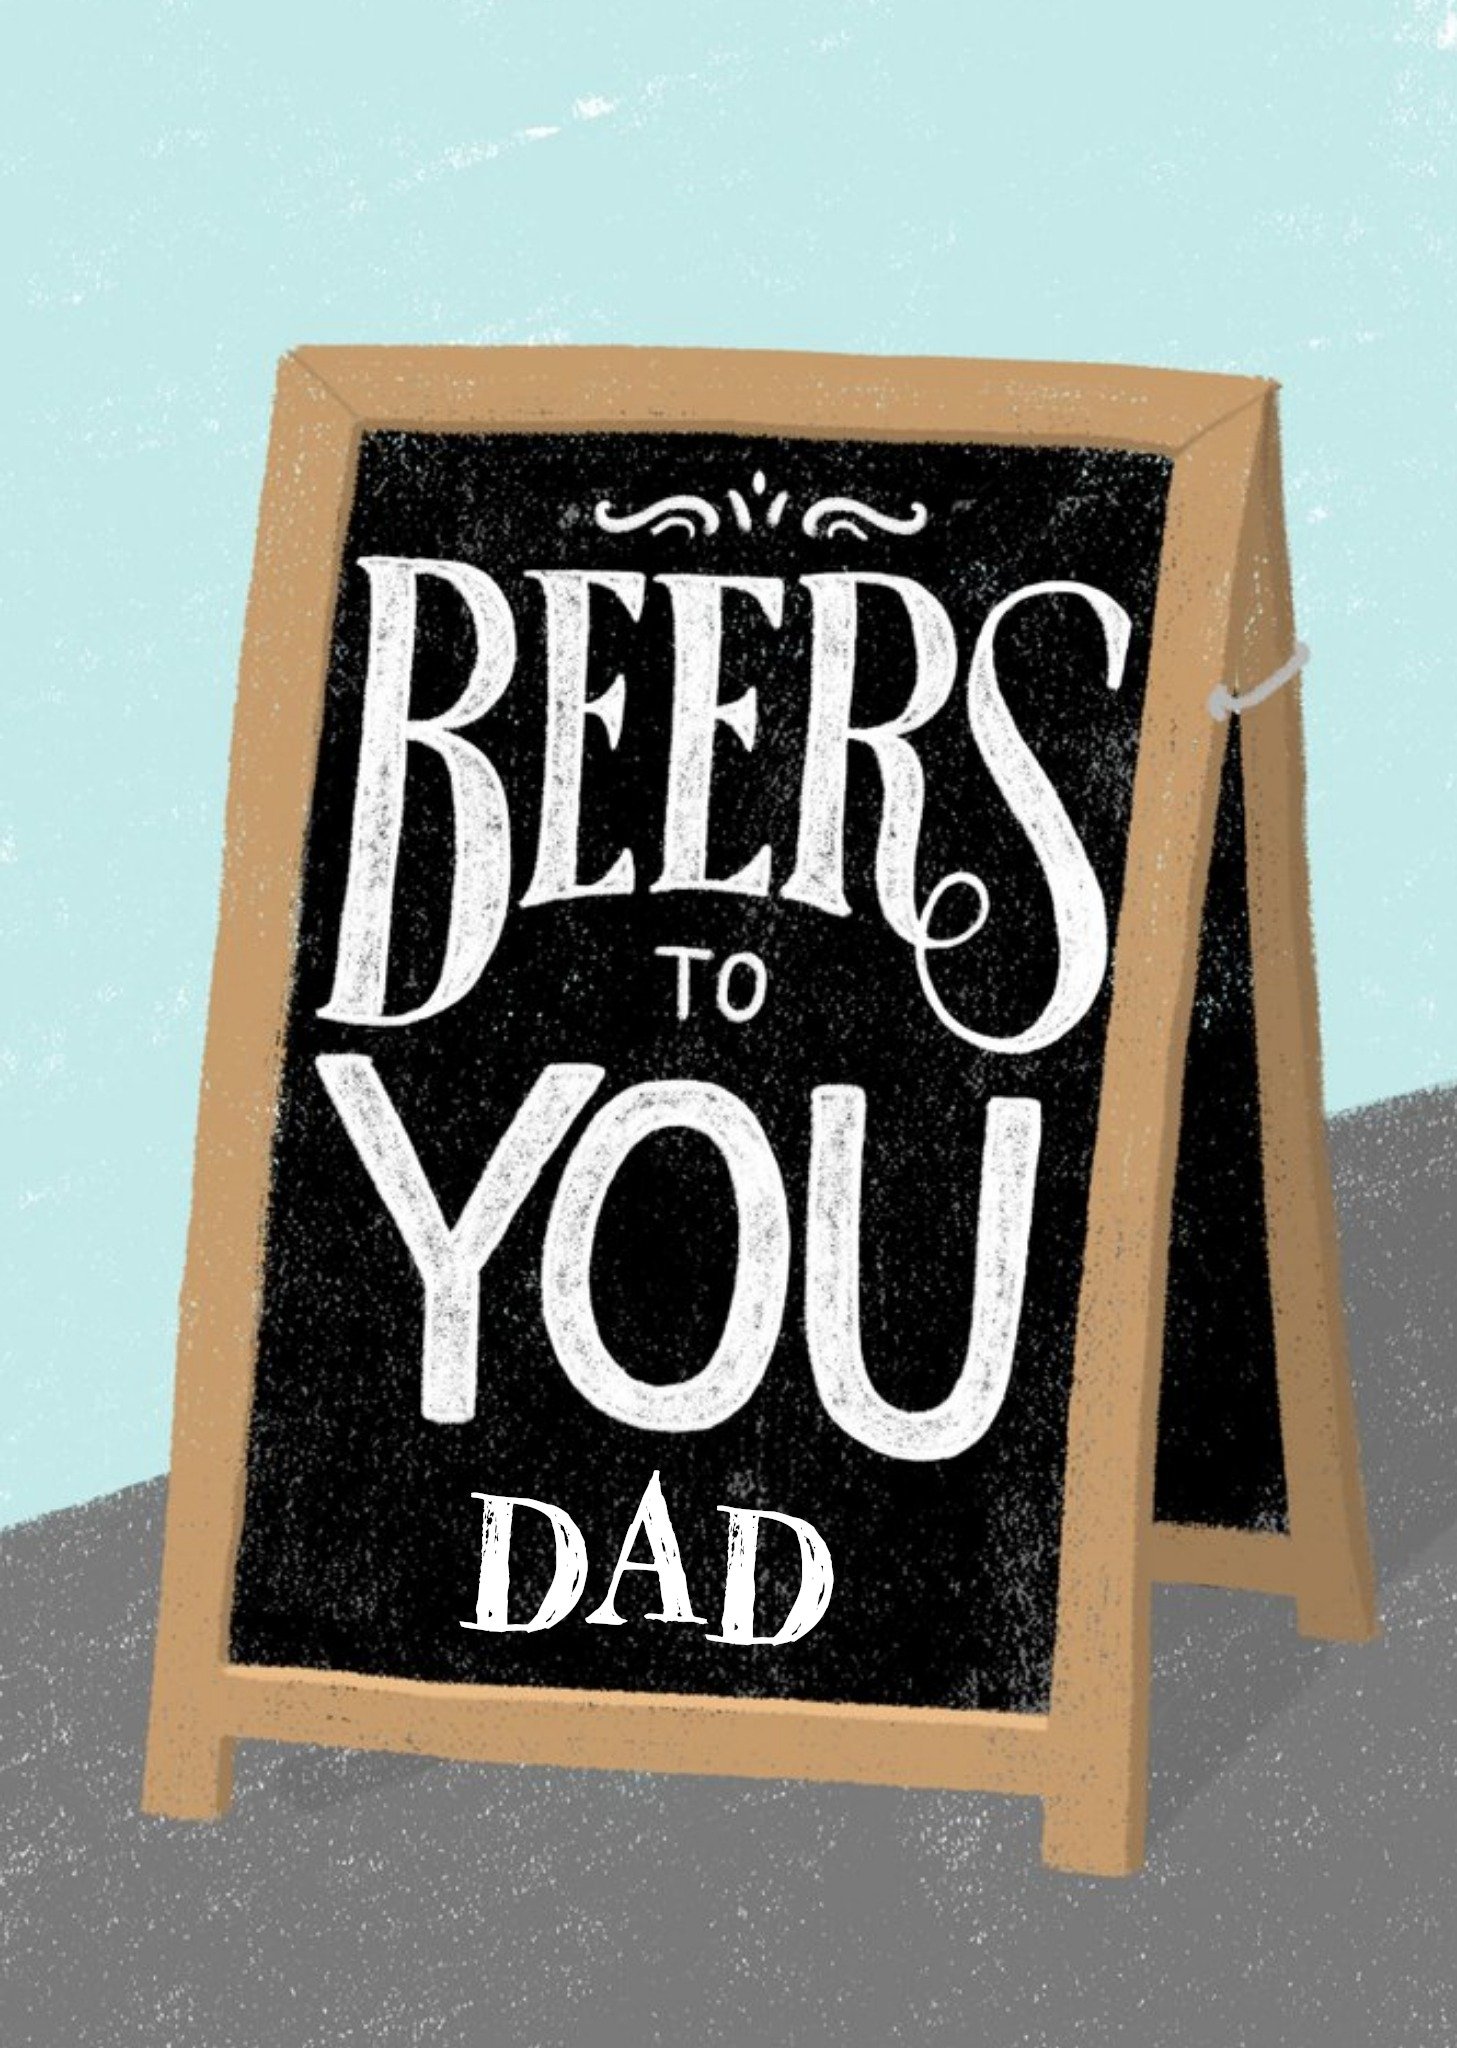 Moonpig Beers To You Dad Sandwich Board Card, Large